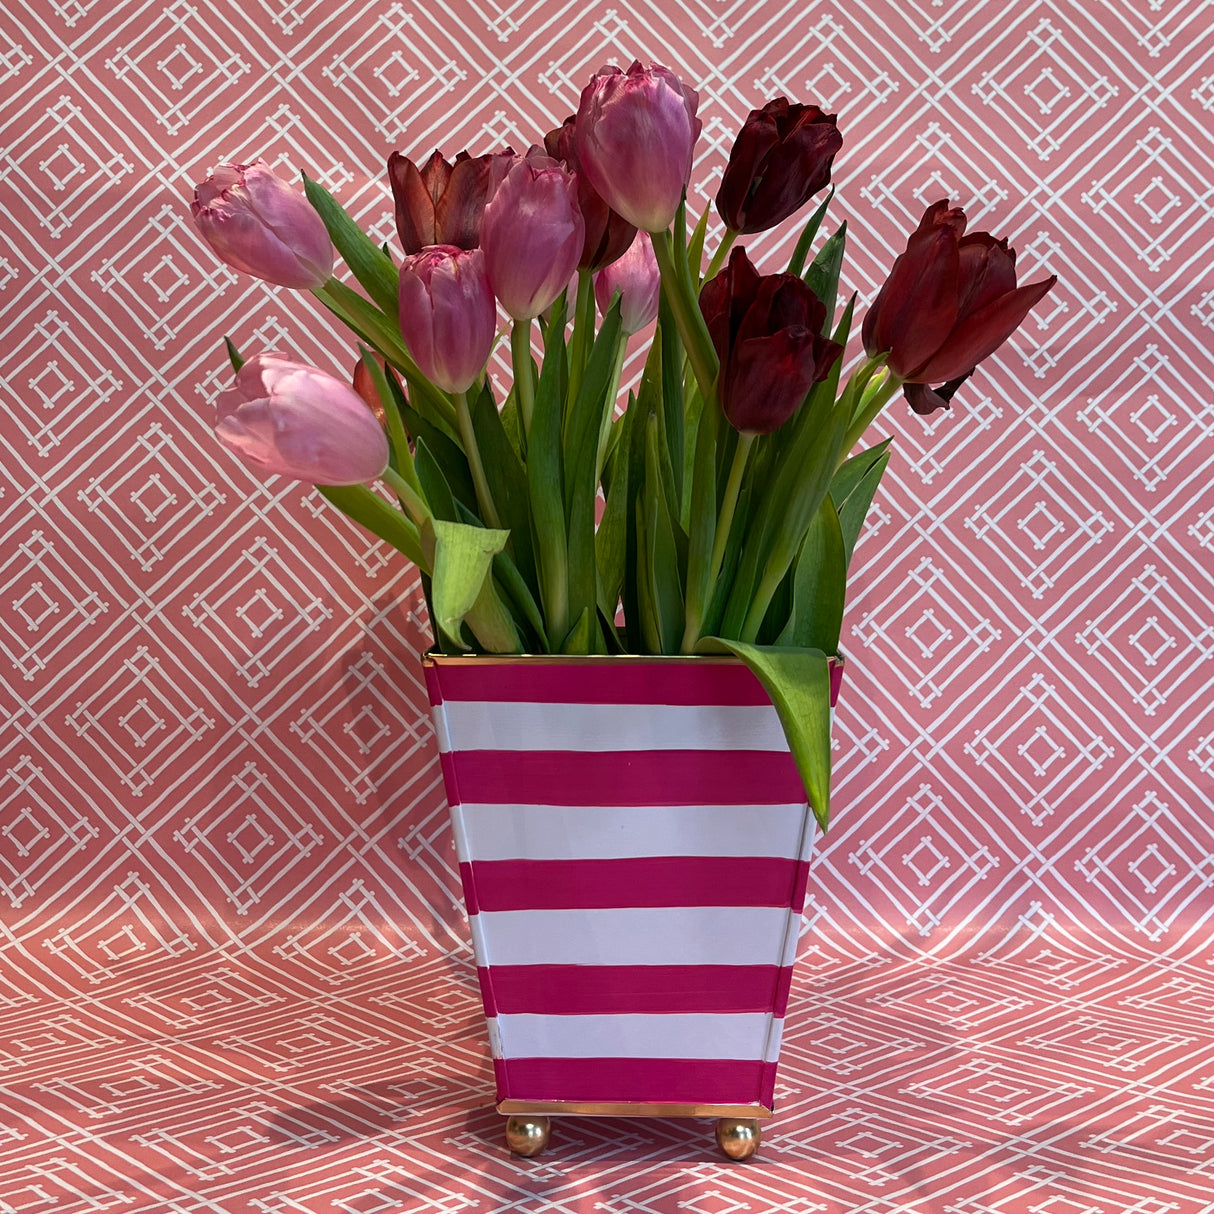 Pink & White Stripe Hand-Painted Tole Planter